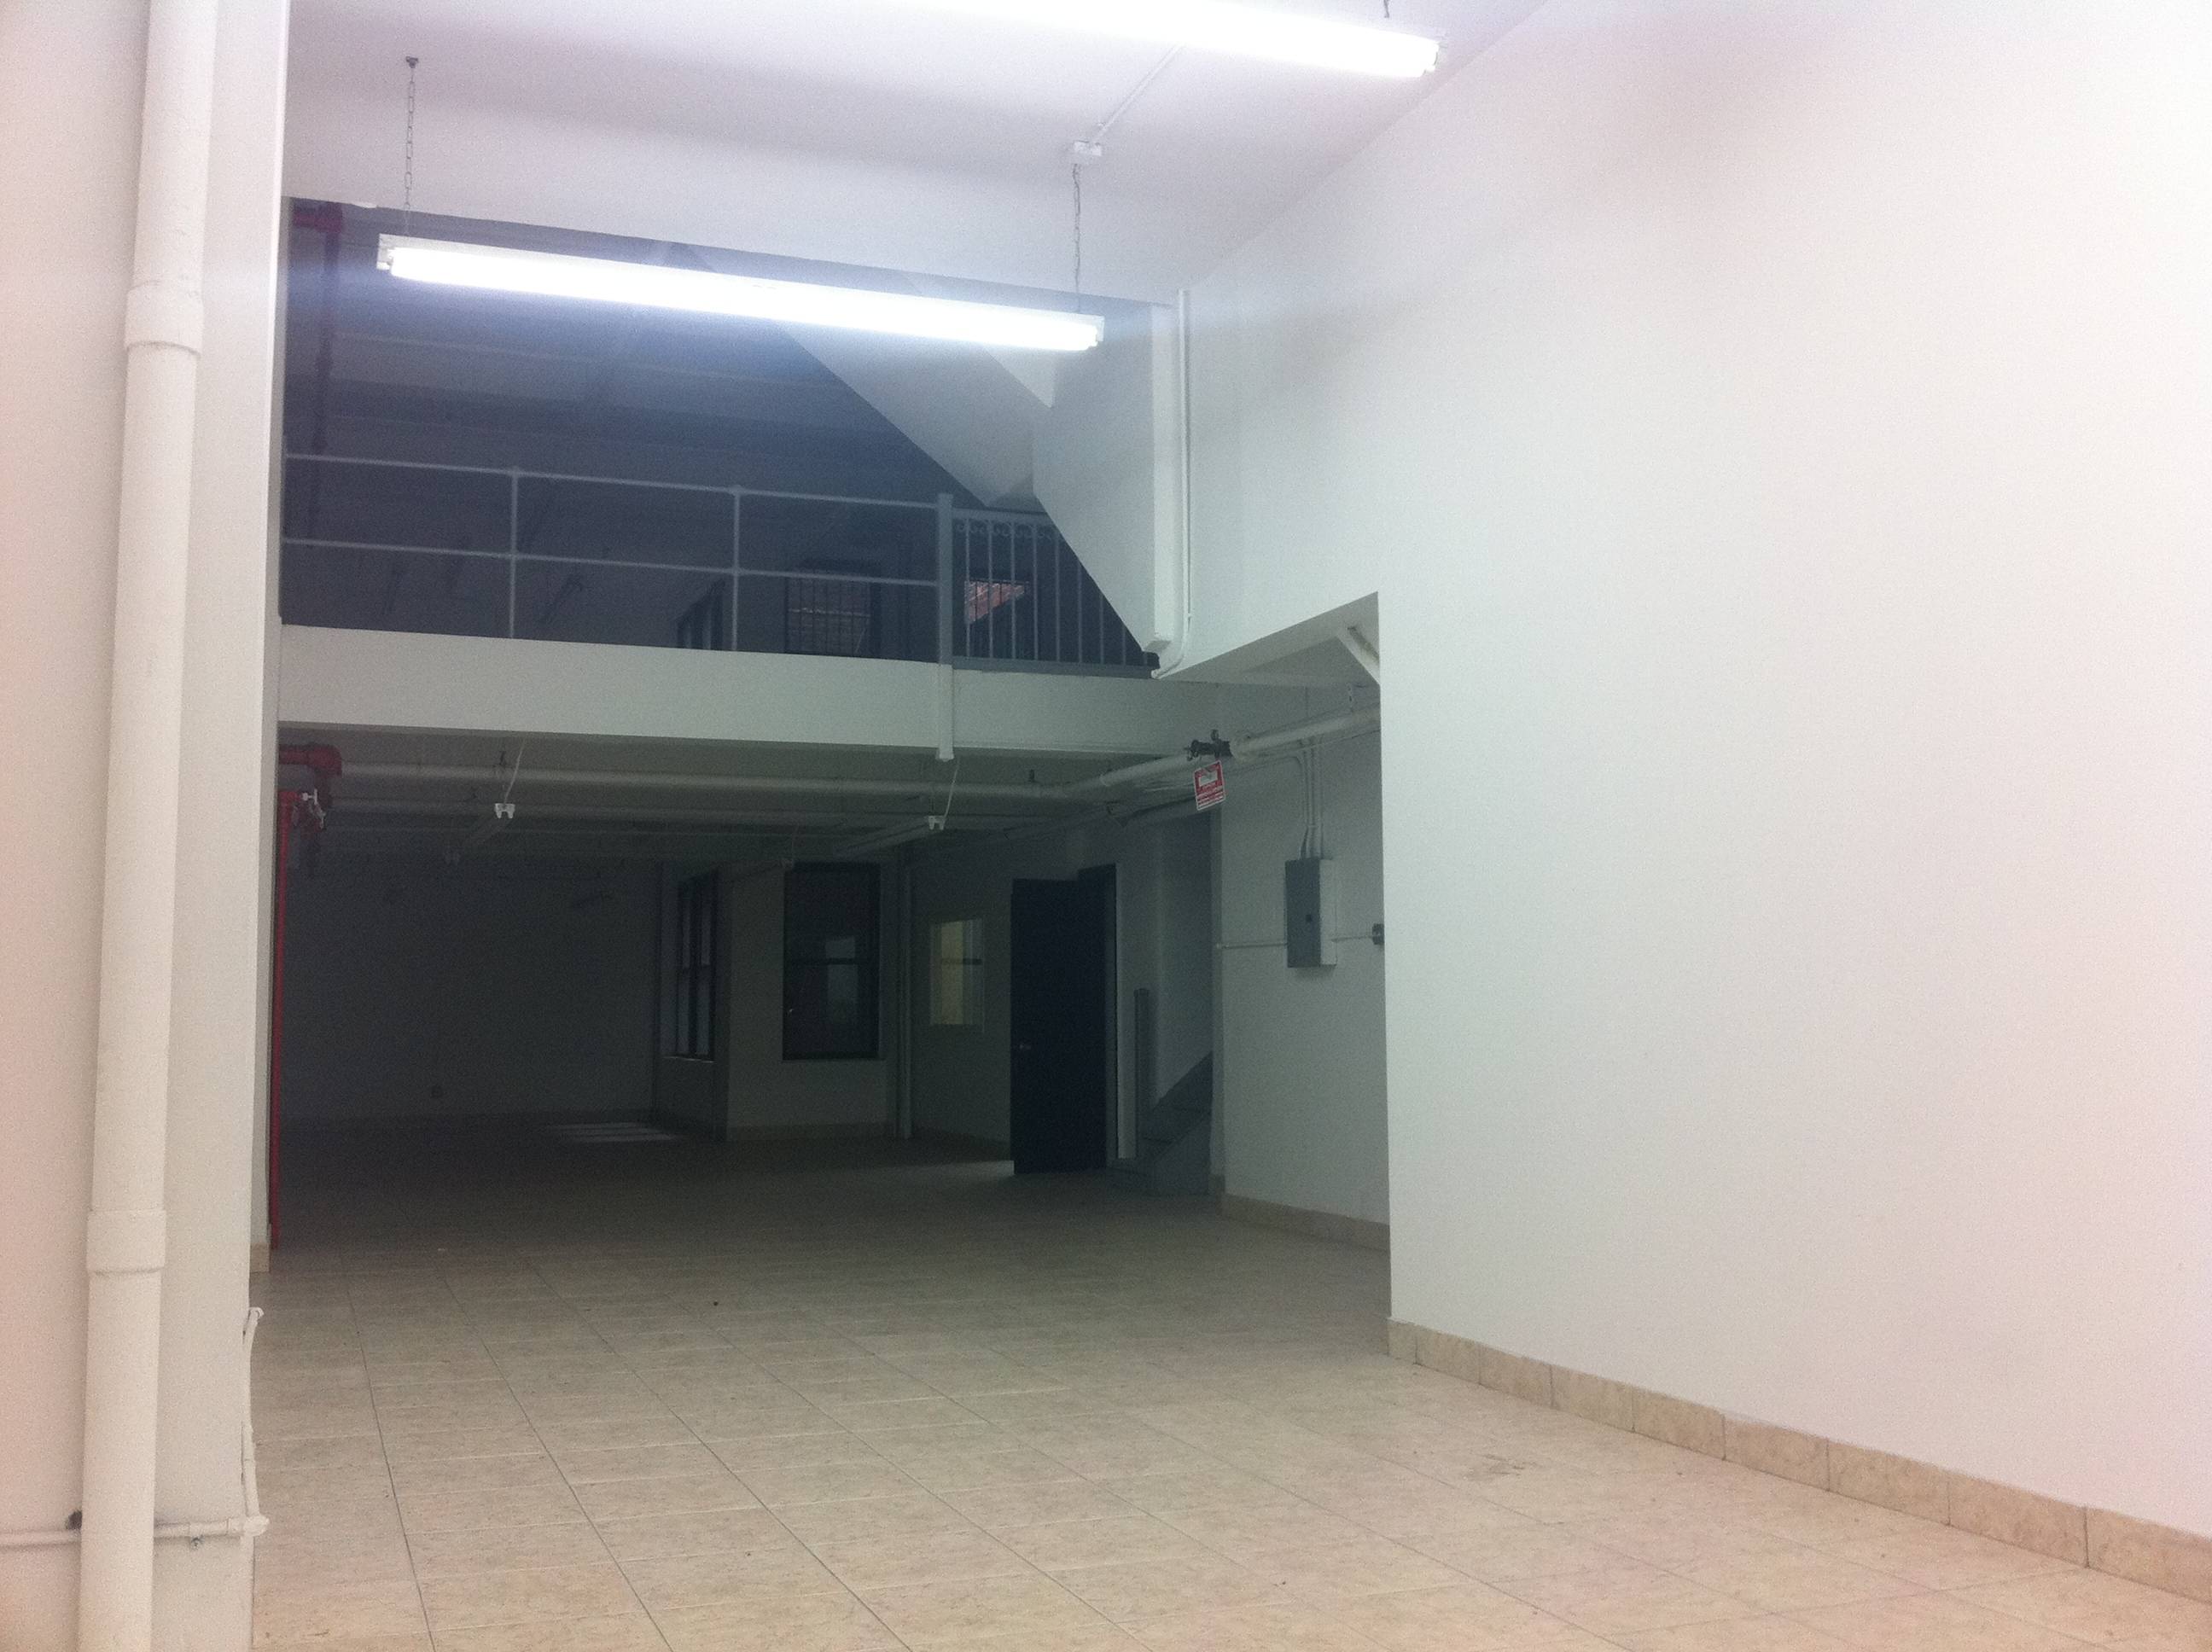 New! Warehouse / Loft Type Retail Space - 3000+ sf, Midtown West Location, Large Basement